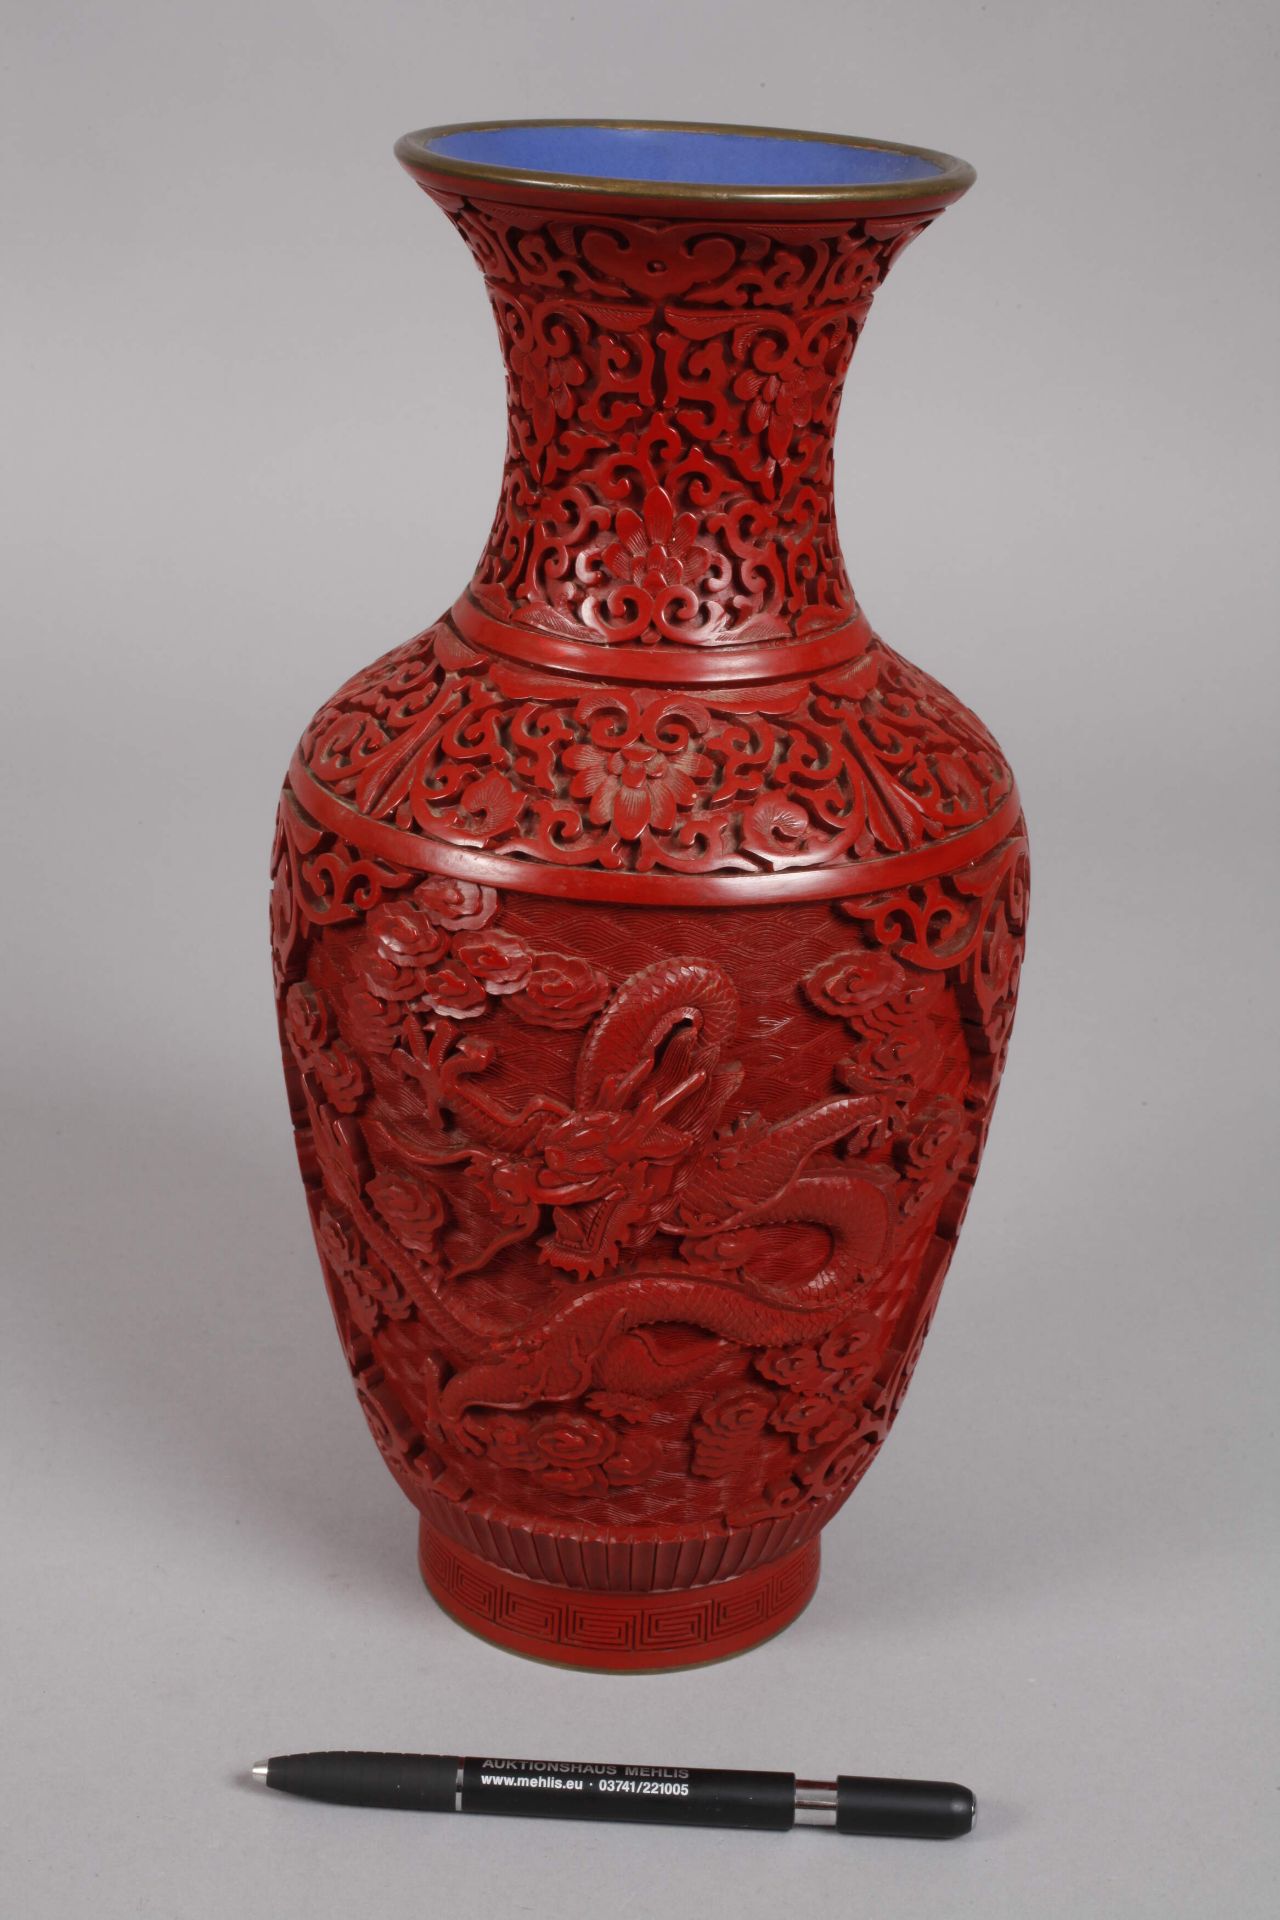 Pair of vases, lacquer carving - Image 2 of 6